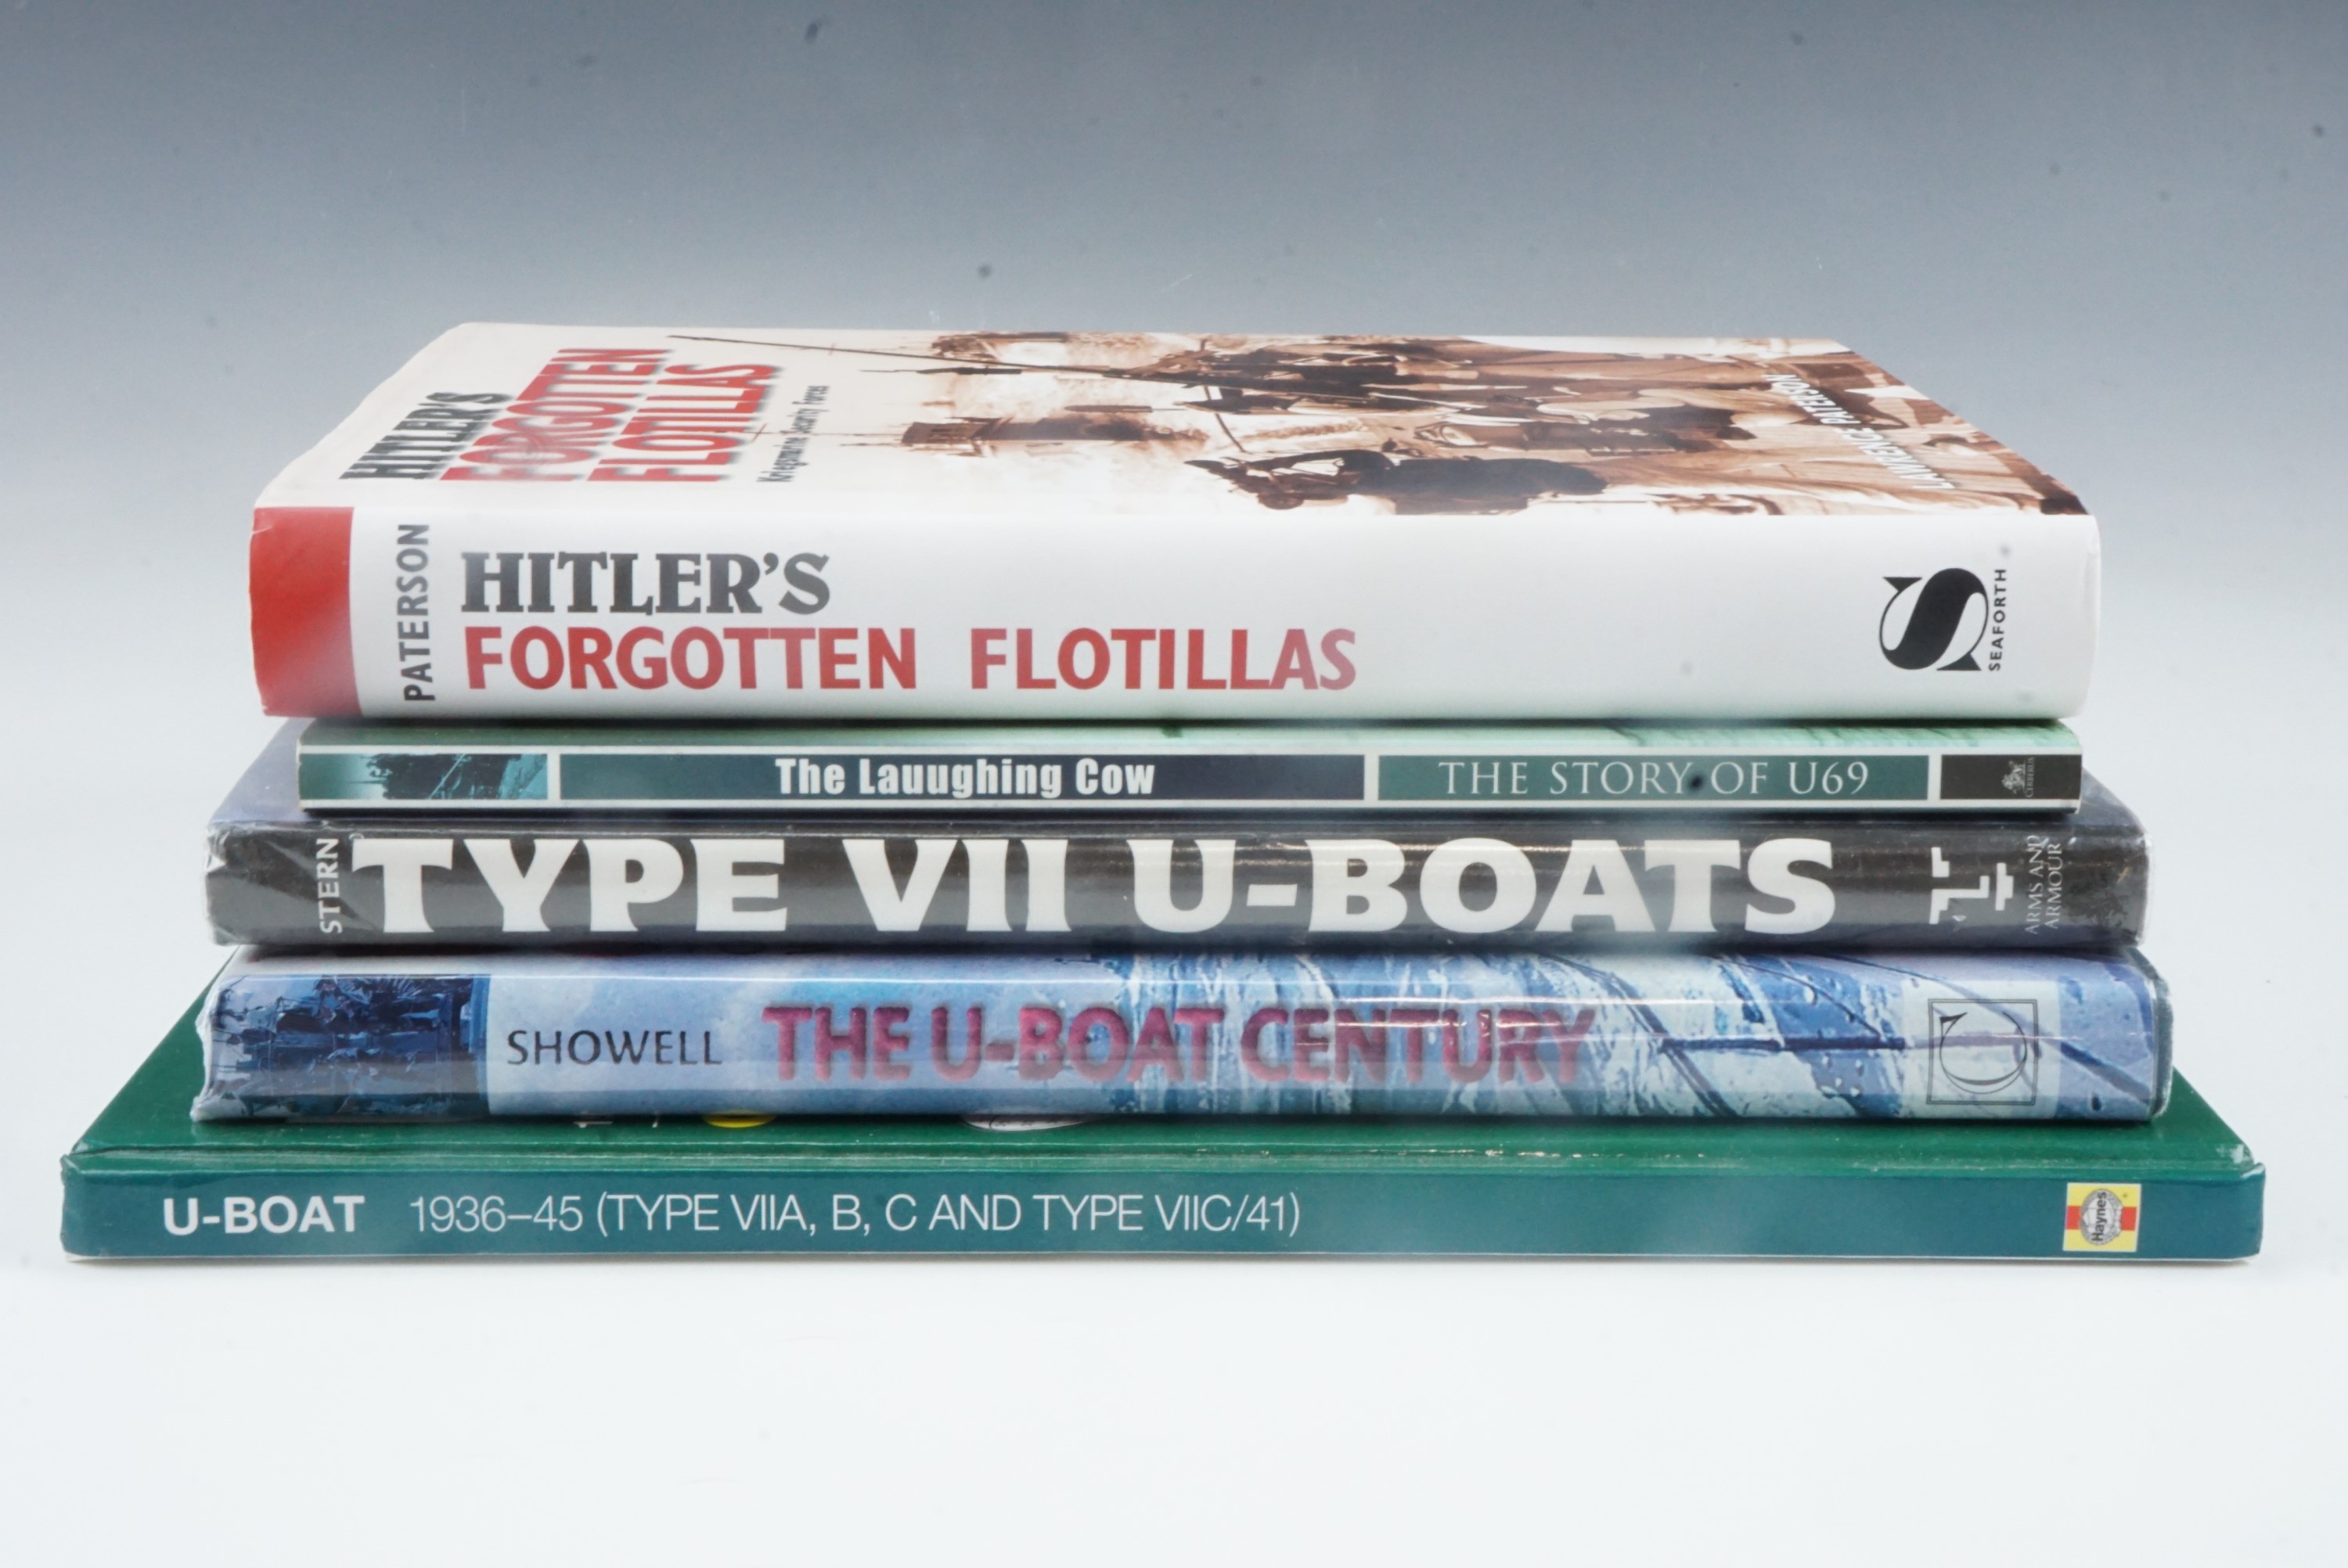 A group of books on German U-Boats and the Kriegsmarine